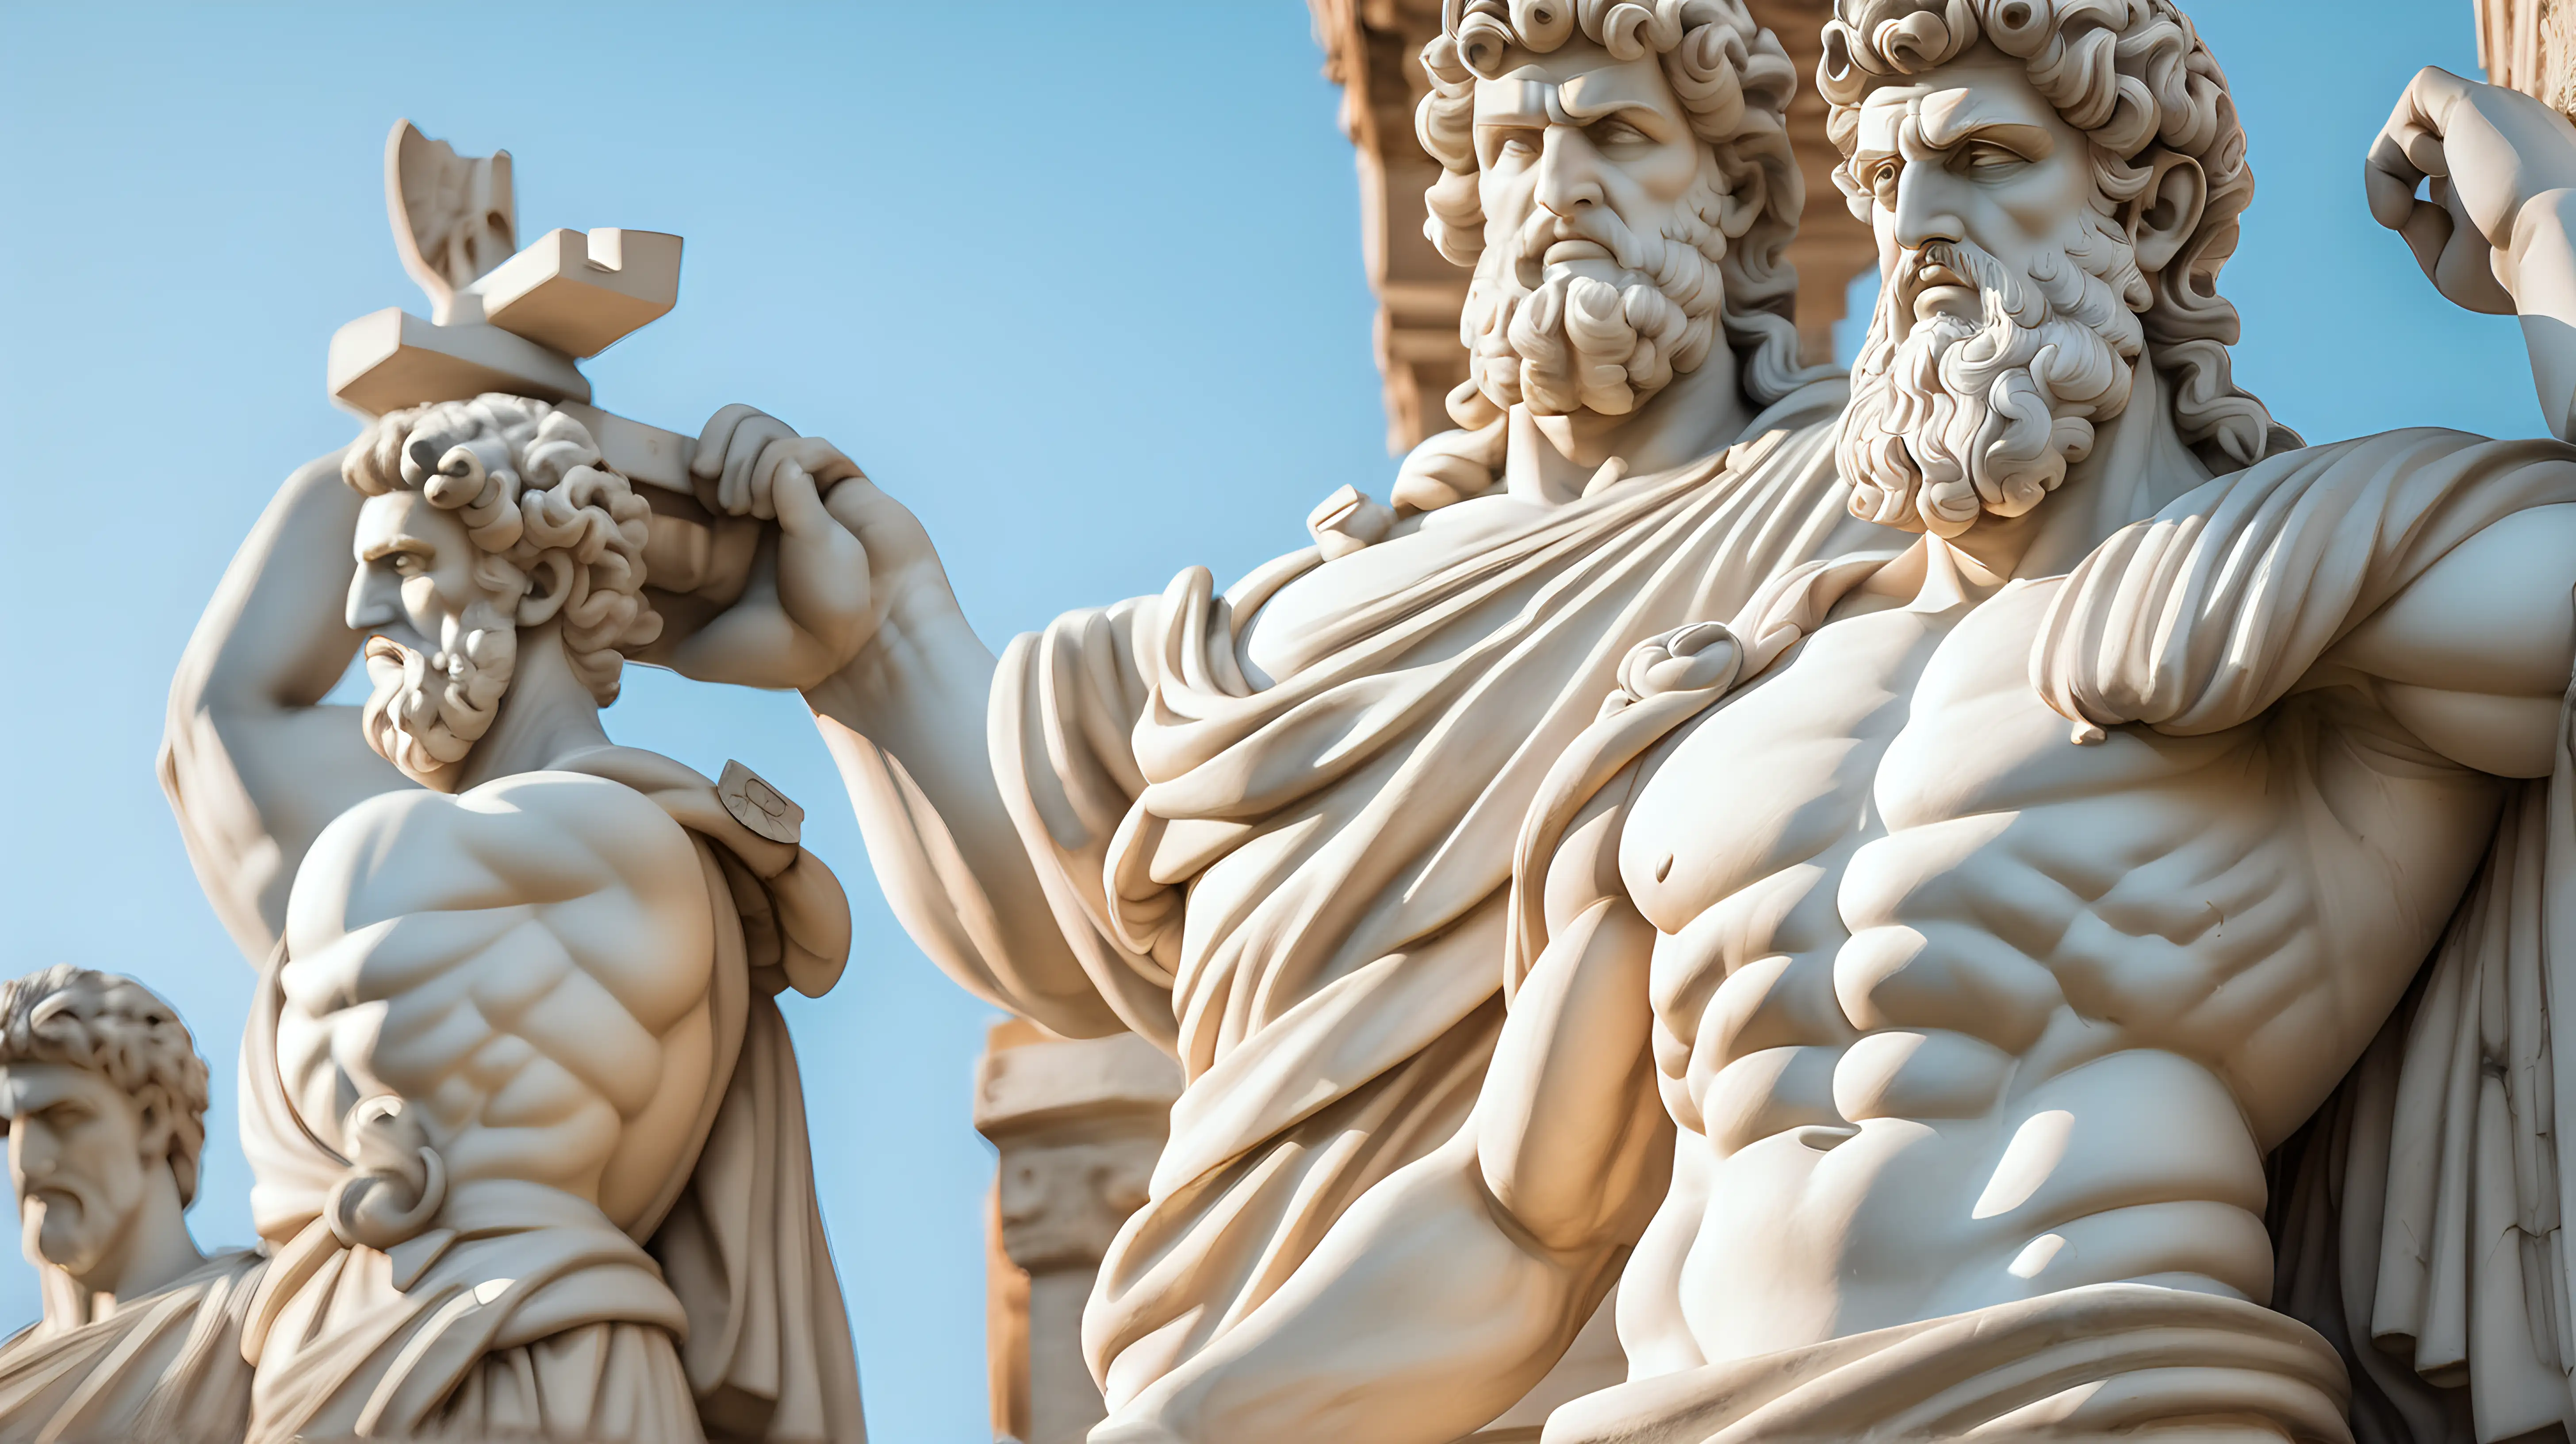 Stoicism, Motivation, stoic muscular statues outside, stoic background horizontal. the statue should be looking at the ancient city